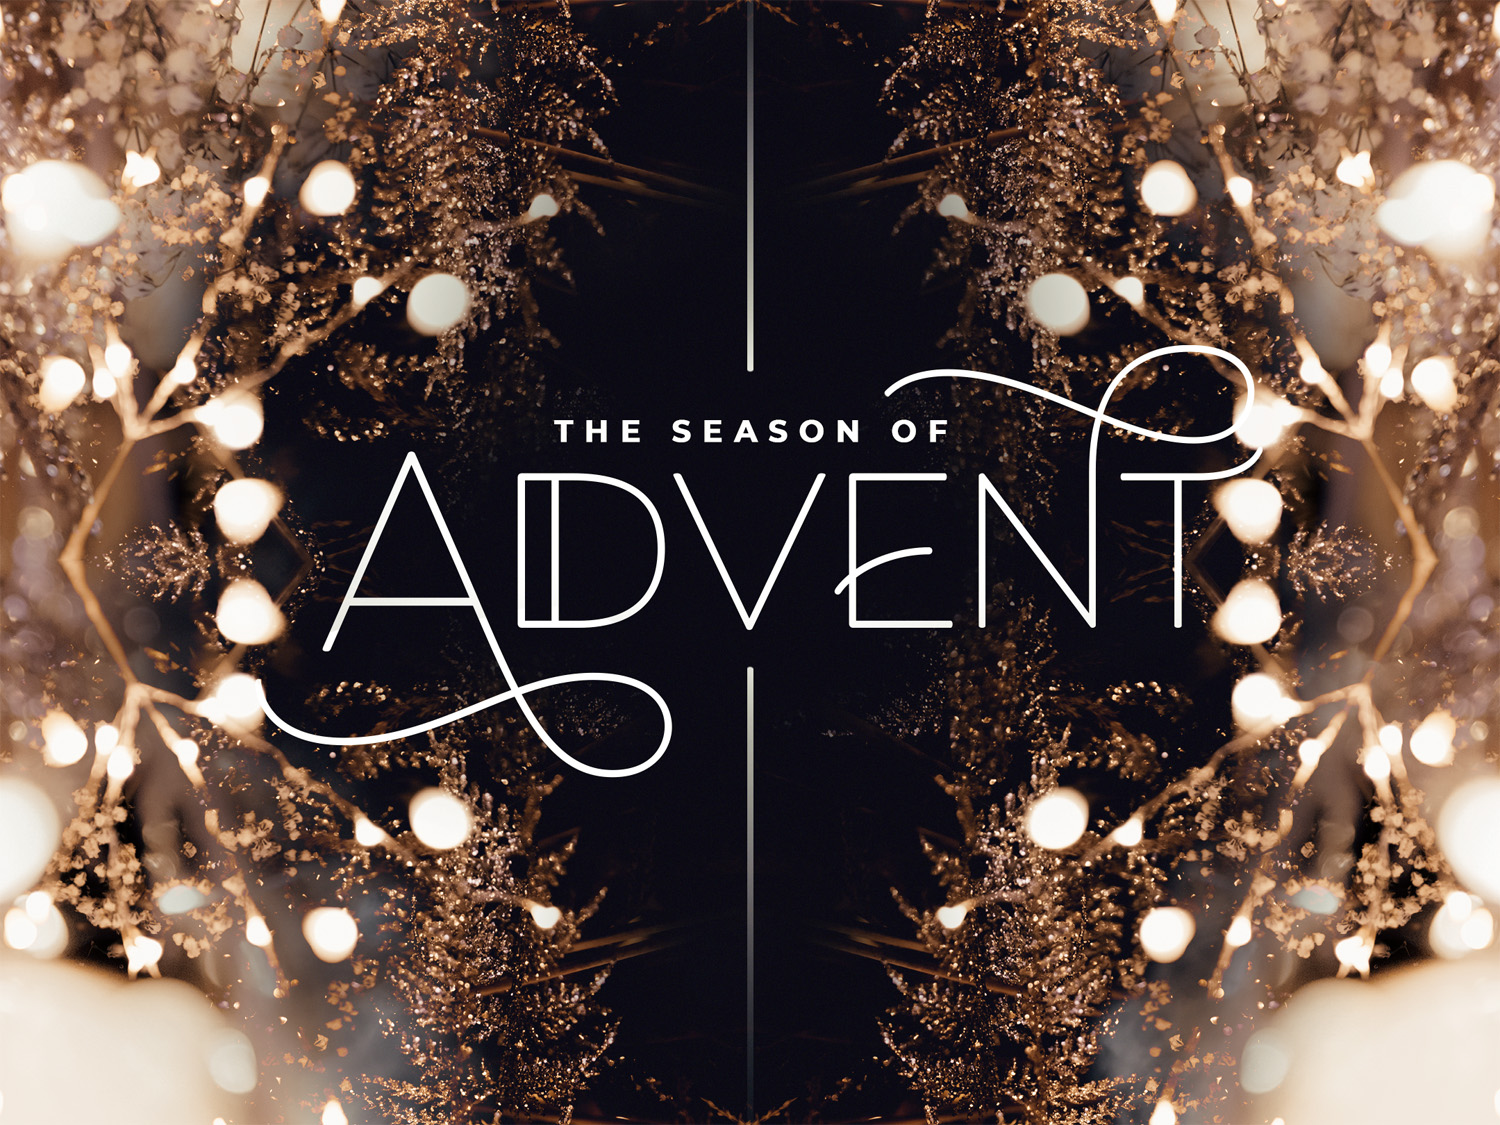 the_season_of_advent-title-1-Standard 4x3 image